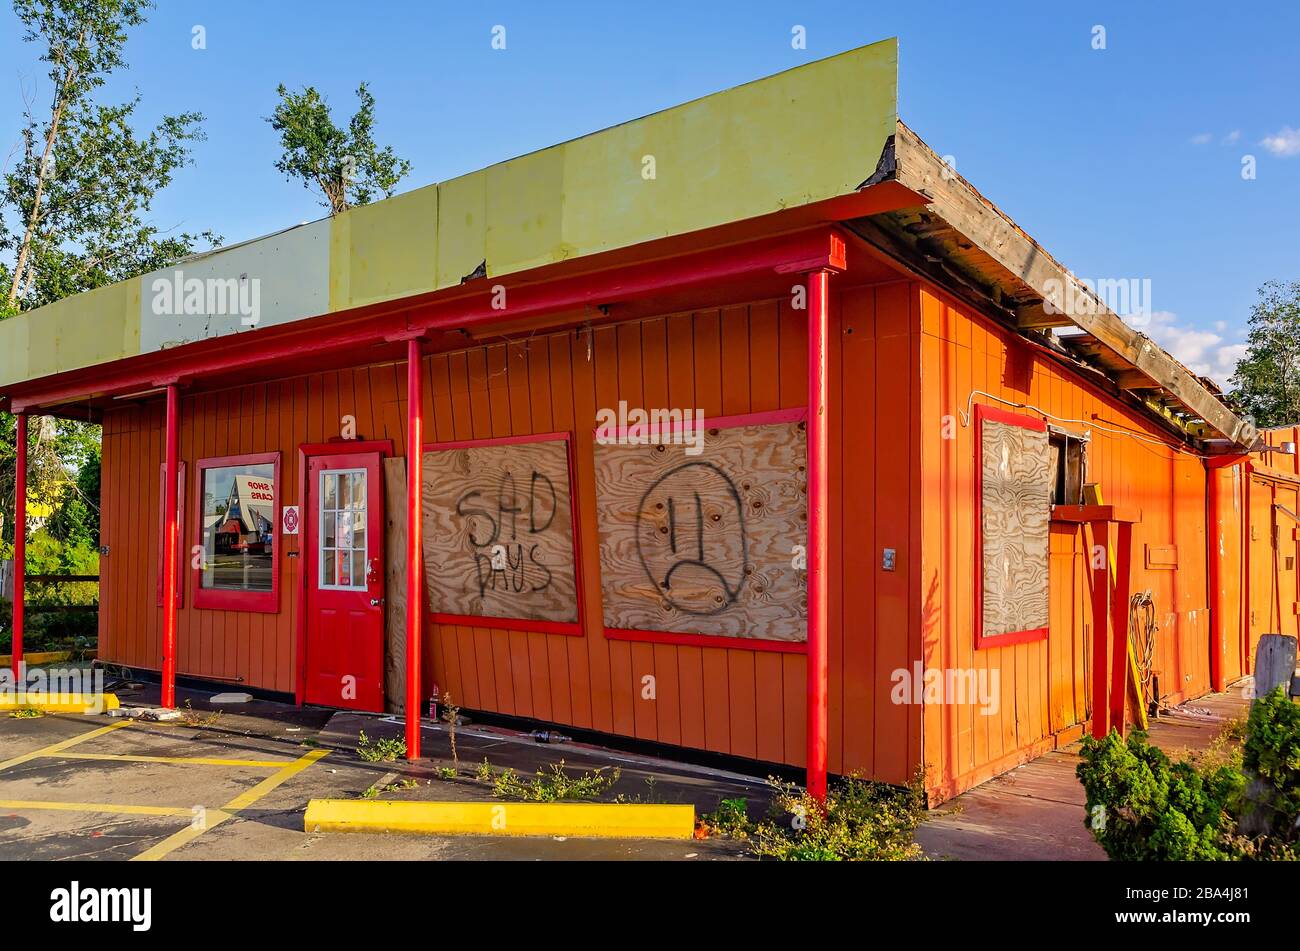 A business remains boarded up and closed a year after Hurricane Michael, Sept. 21, 2019, in Panama City, Florida. Stock Photo